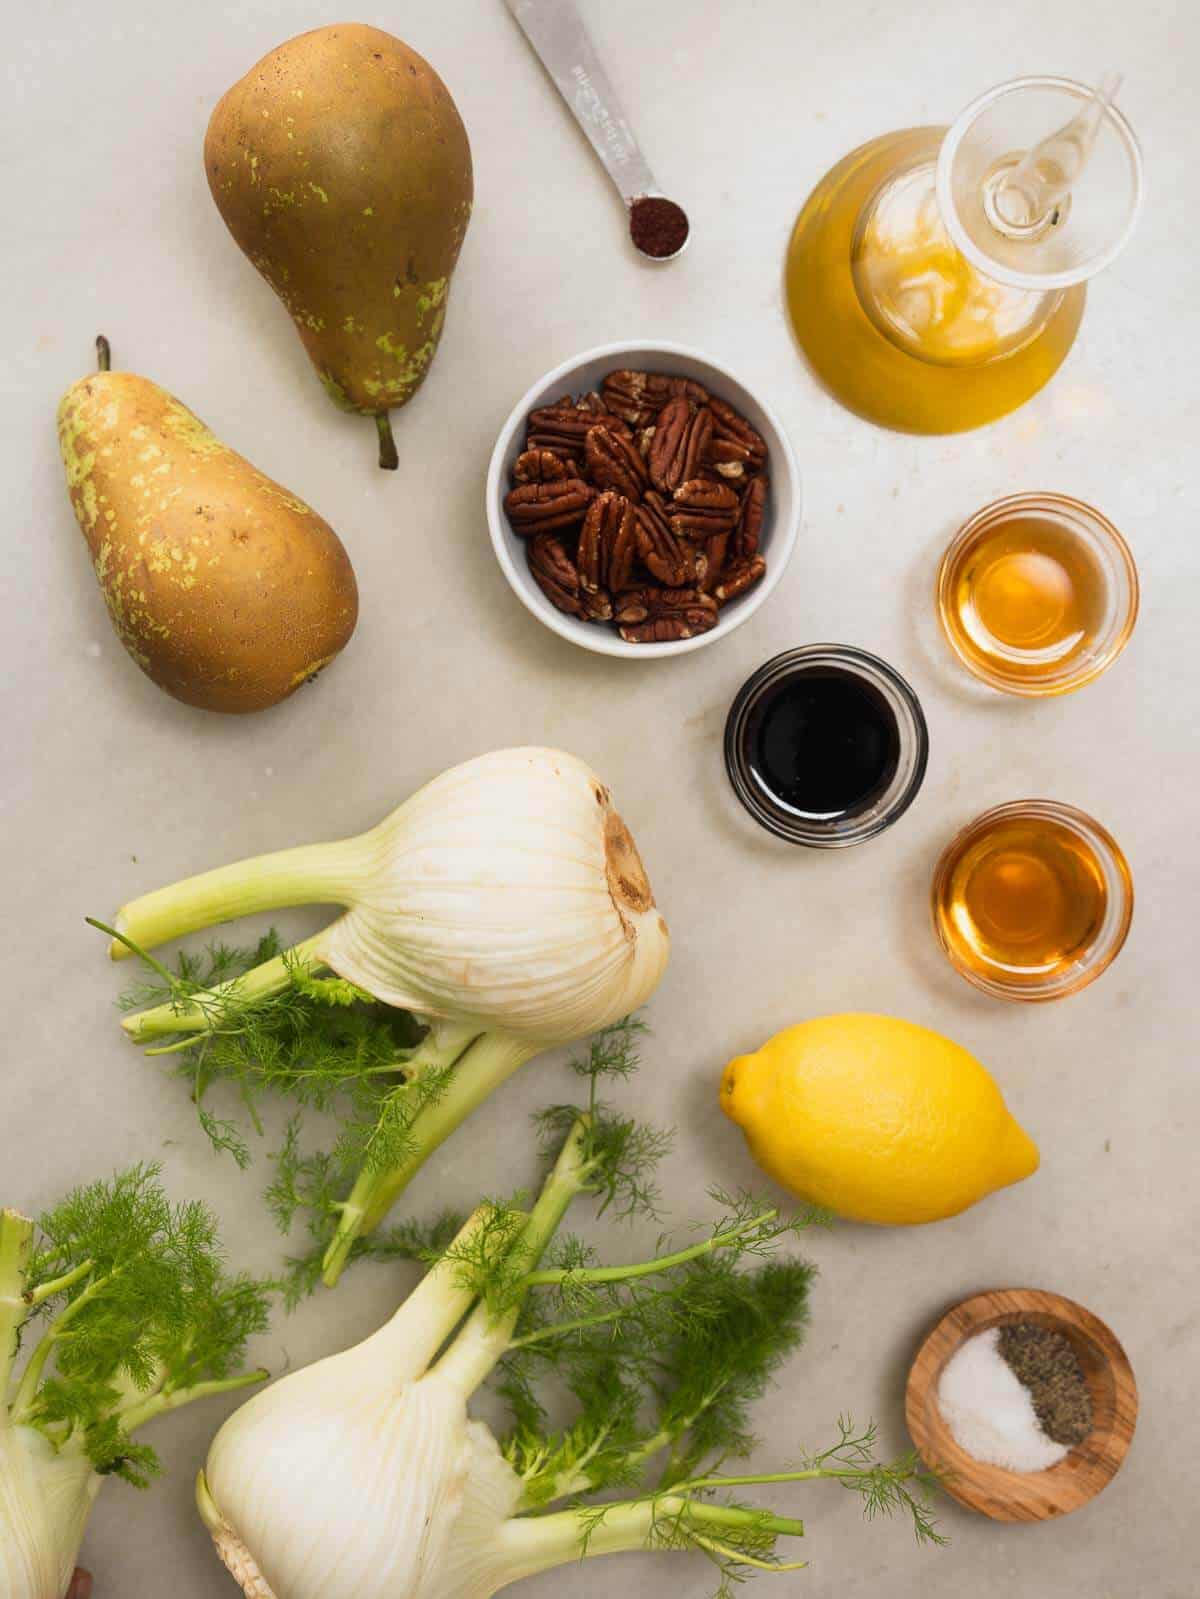 ingredients to make roasted fennel salad and pear recipe.